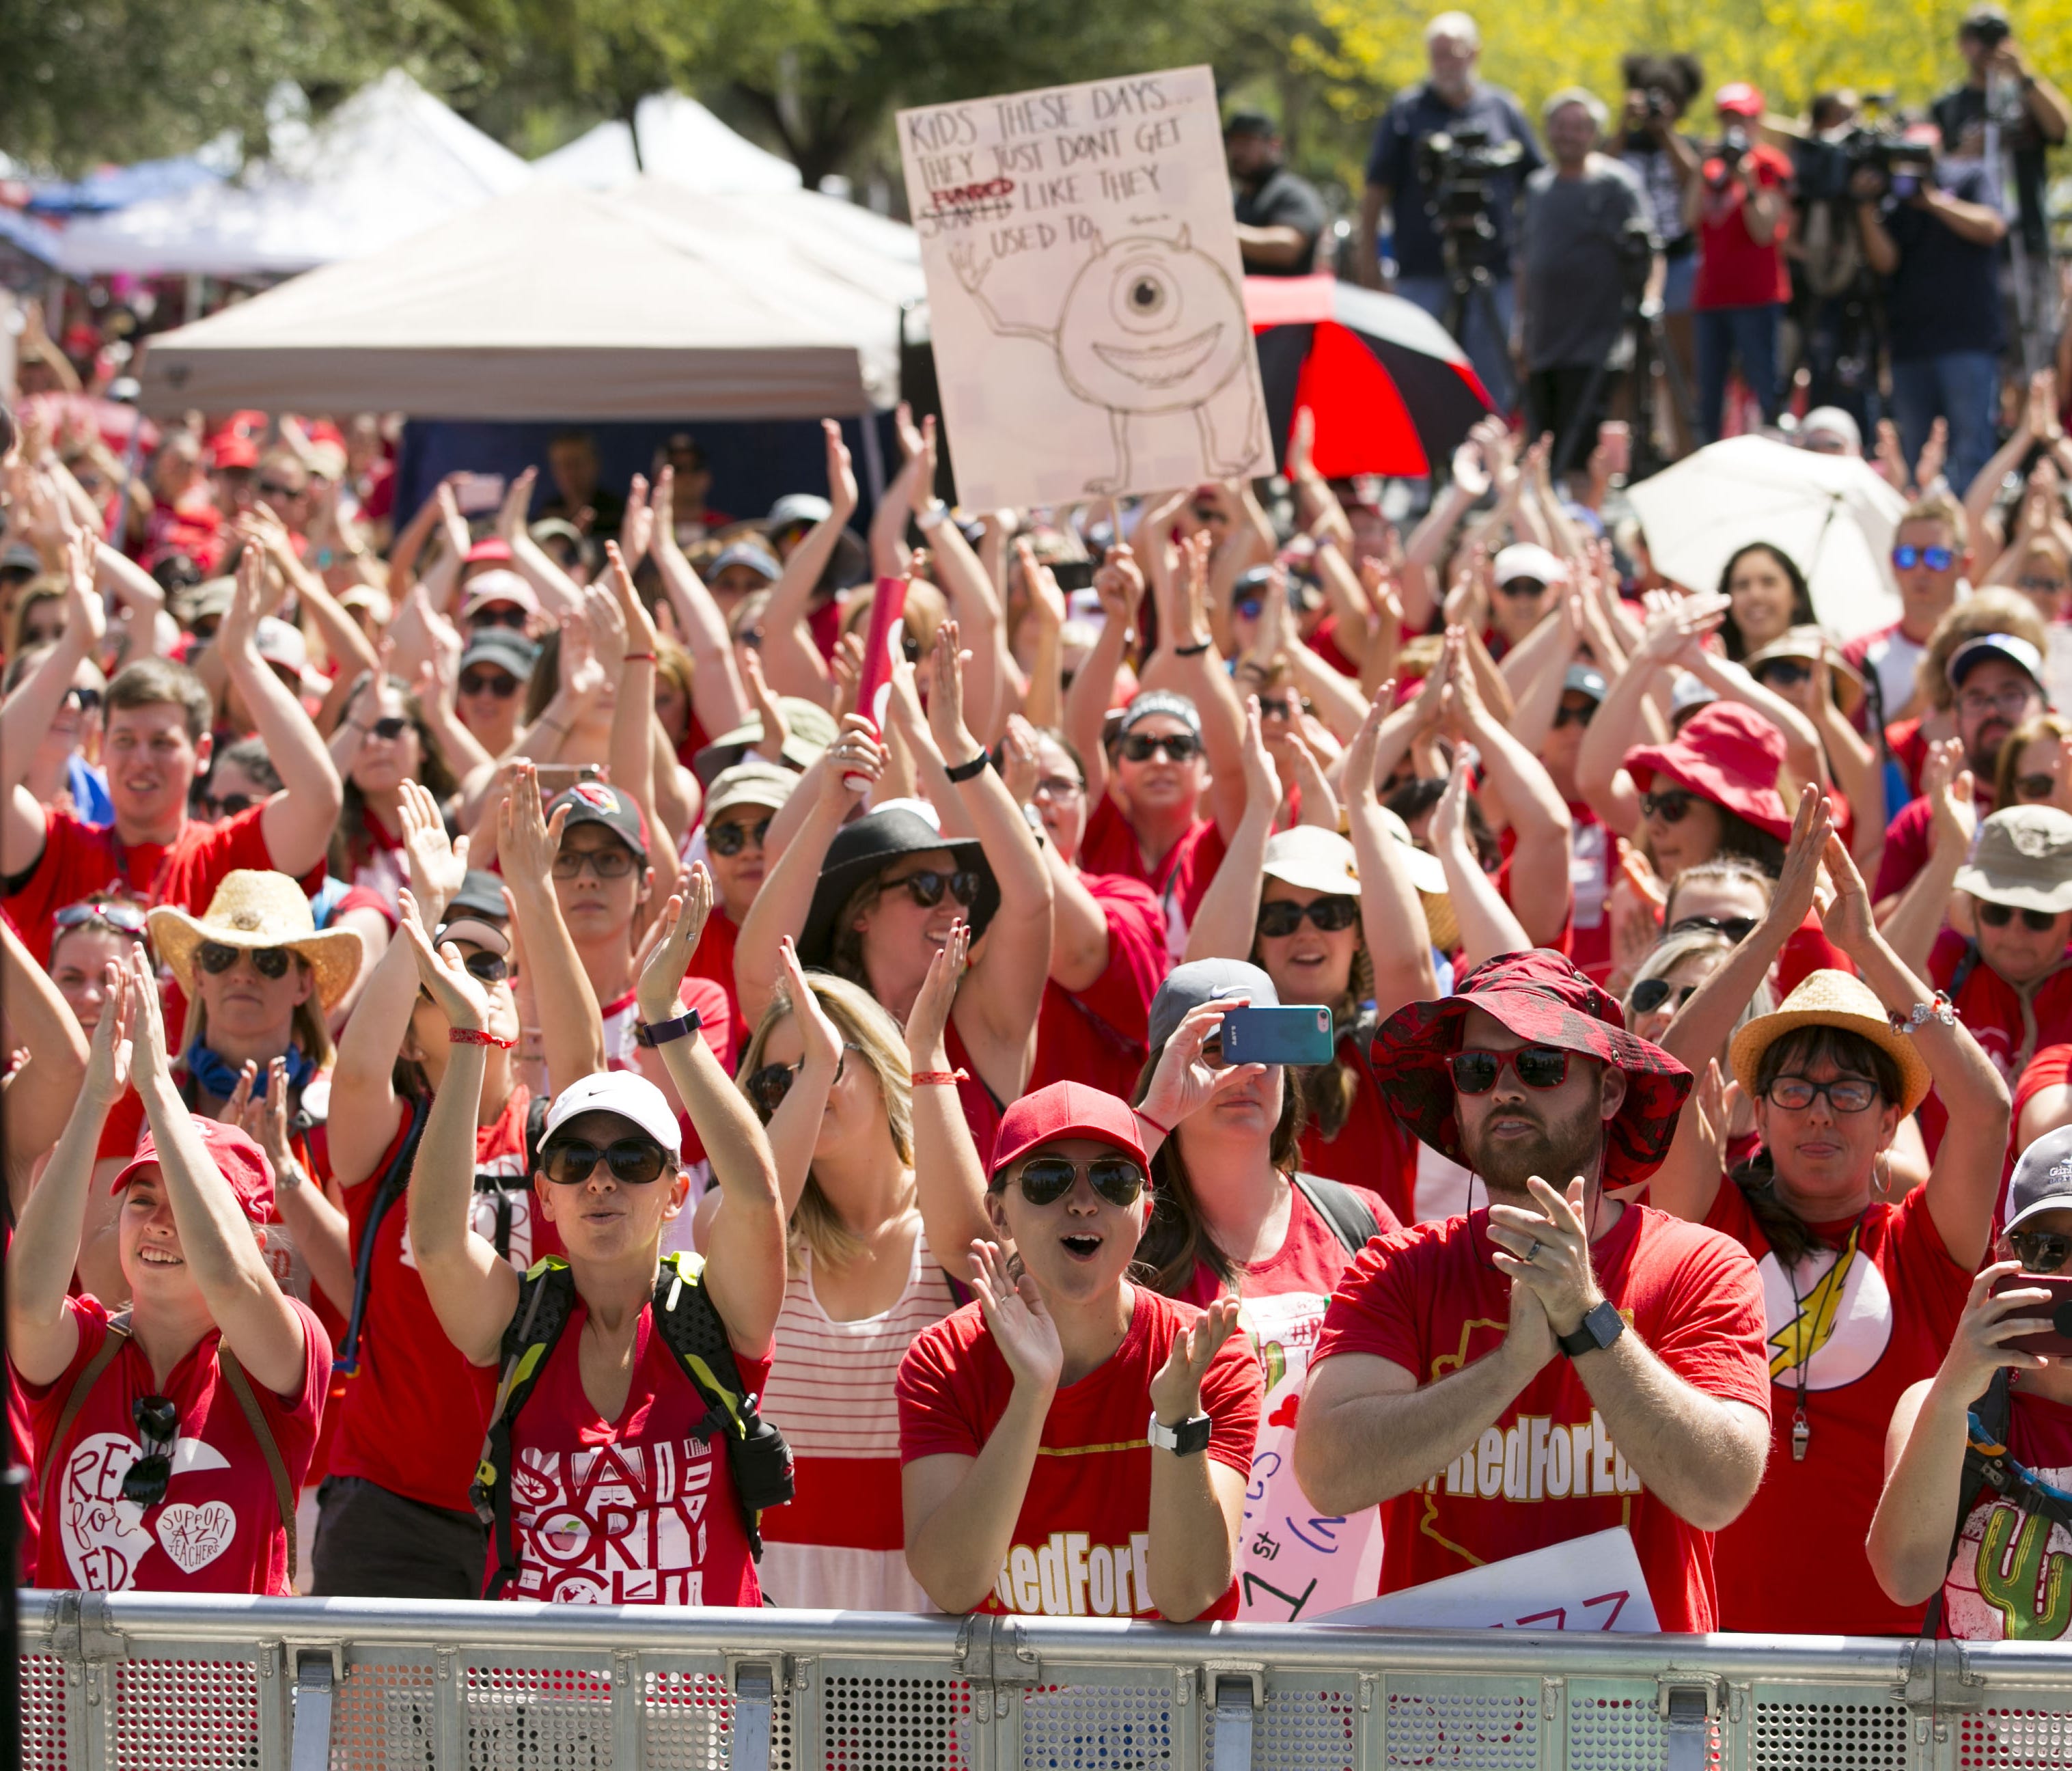 Teachers and other supporters at a RedForEd rally at the Arizona Capitol in Phoenix on the second day of the Arizona teacher walkout on Friday, April 27, 2018.